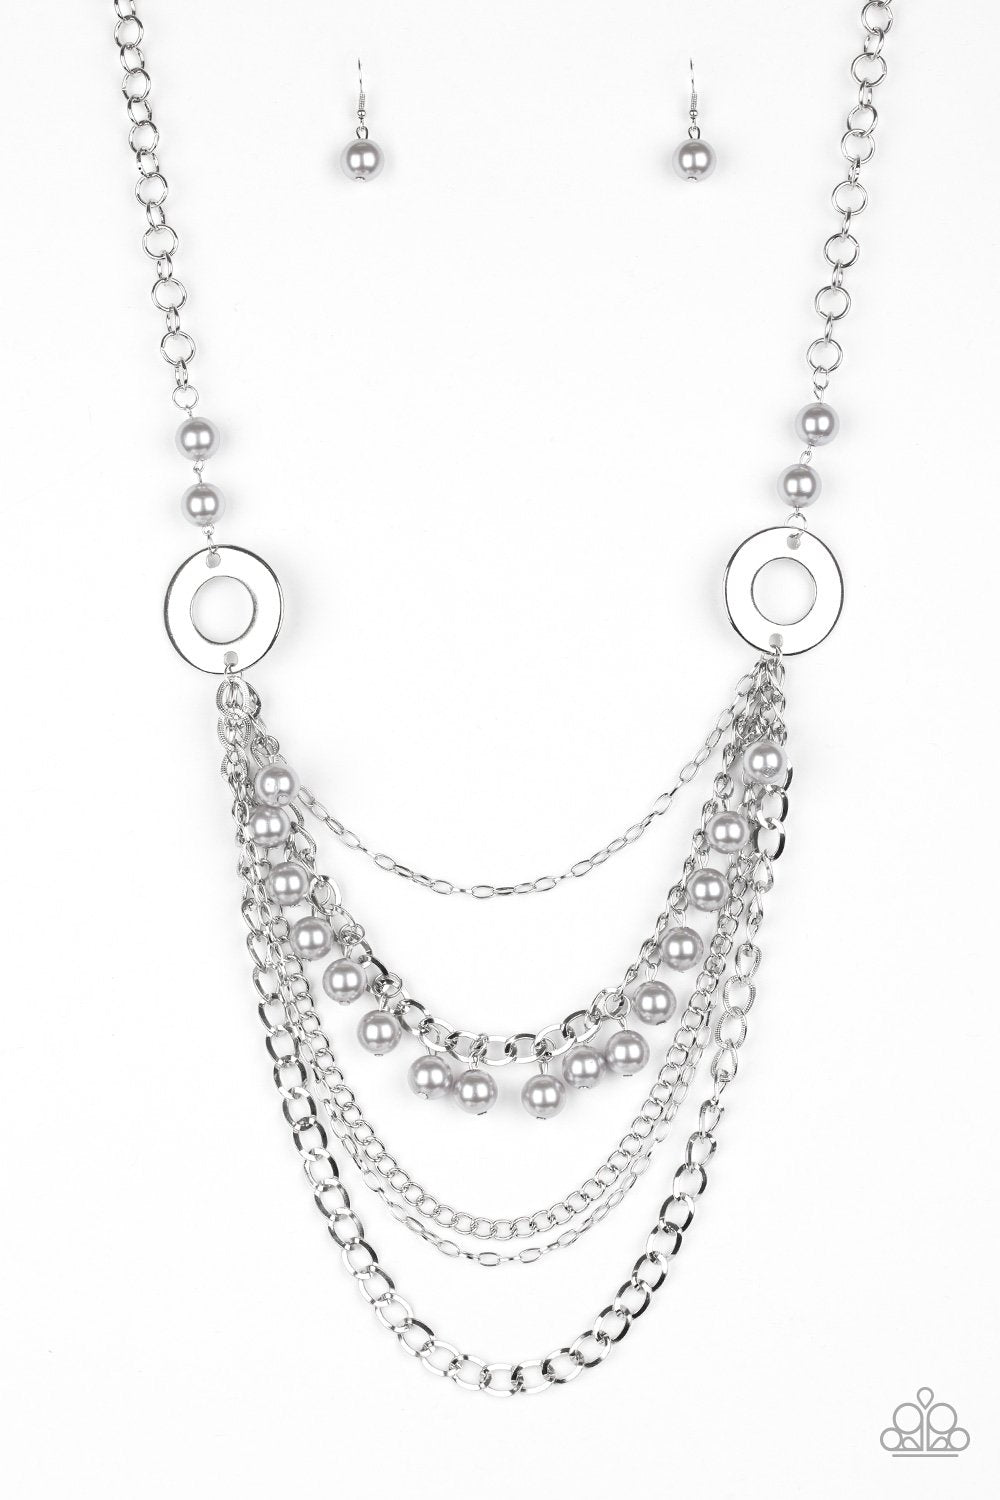 Paparazzi Necklace ~ BELLES and Whistles - Silver